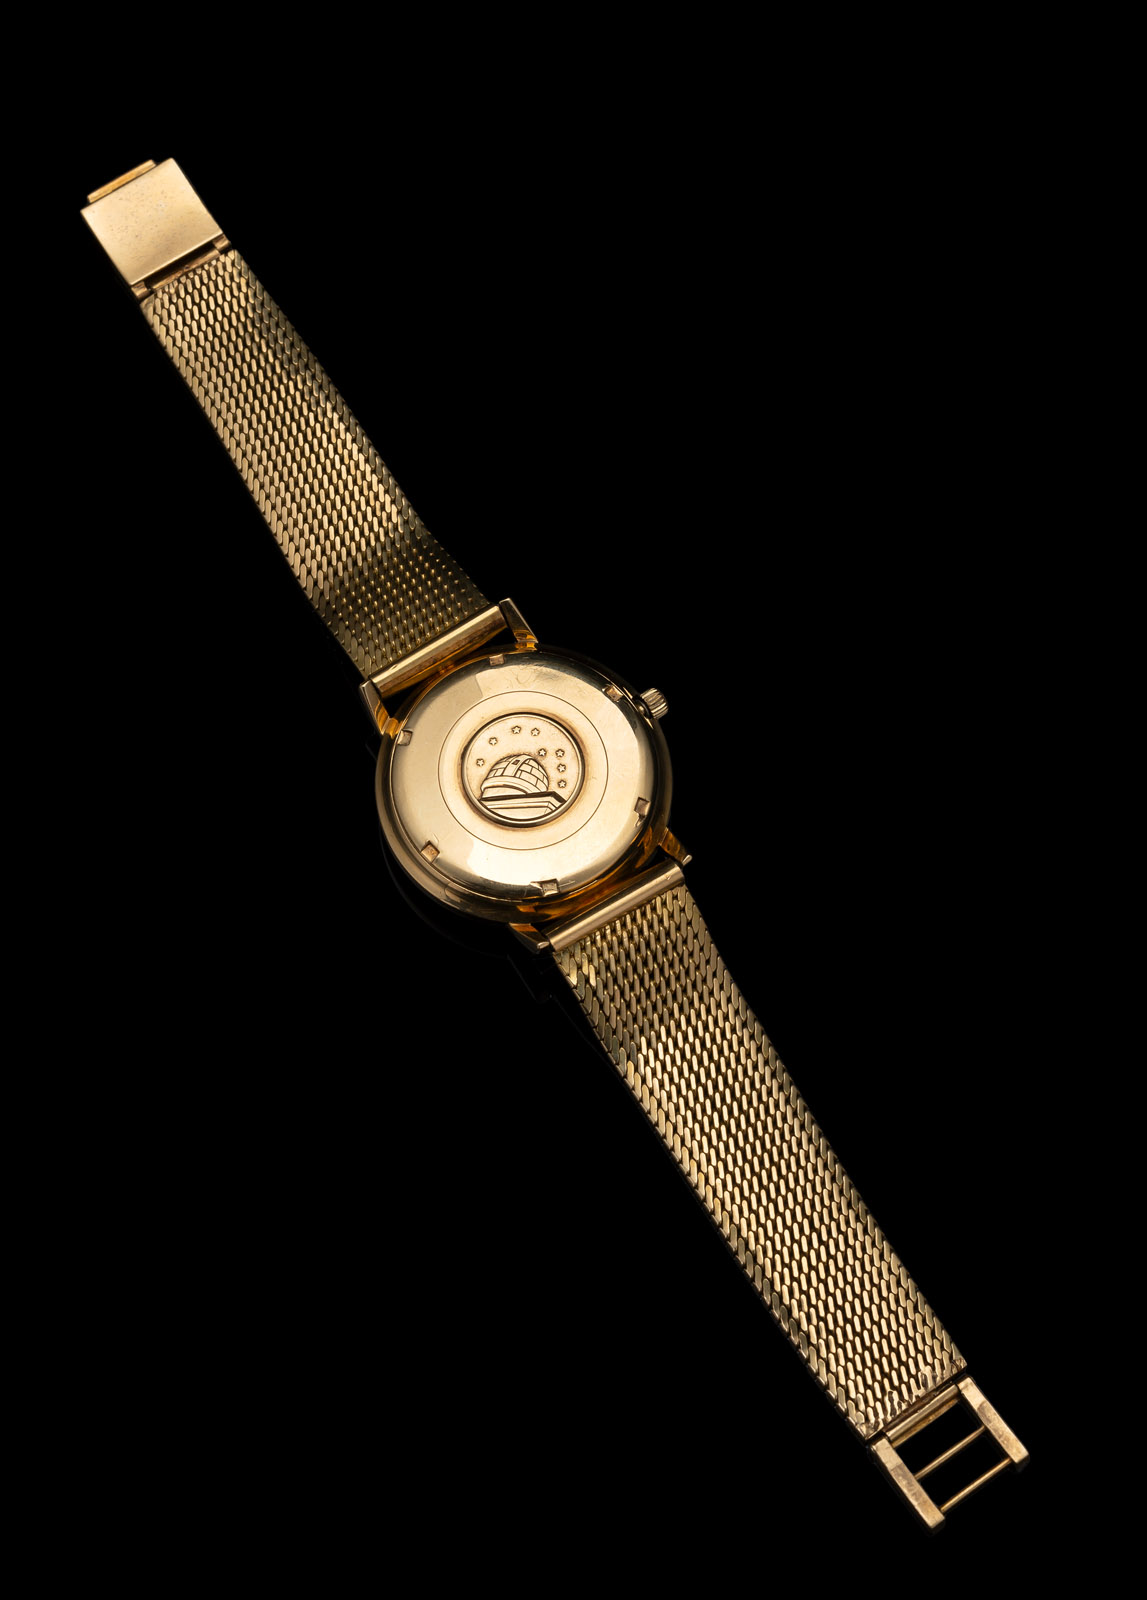 A FINE OMEGA GENTLEMAN'S GOLD WATCH - Image 3 of 3